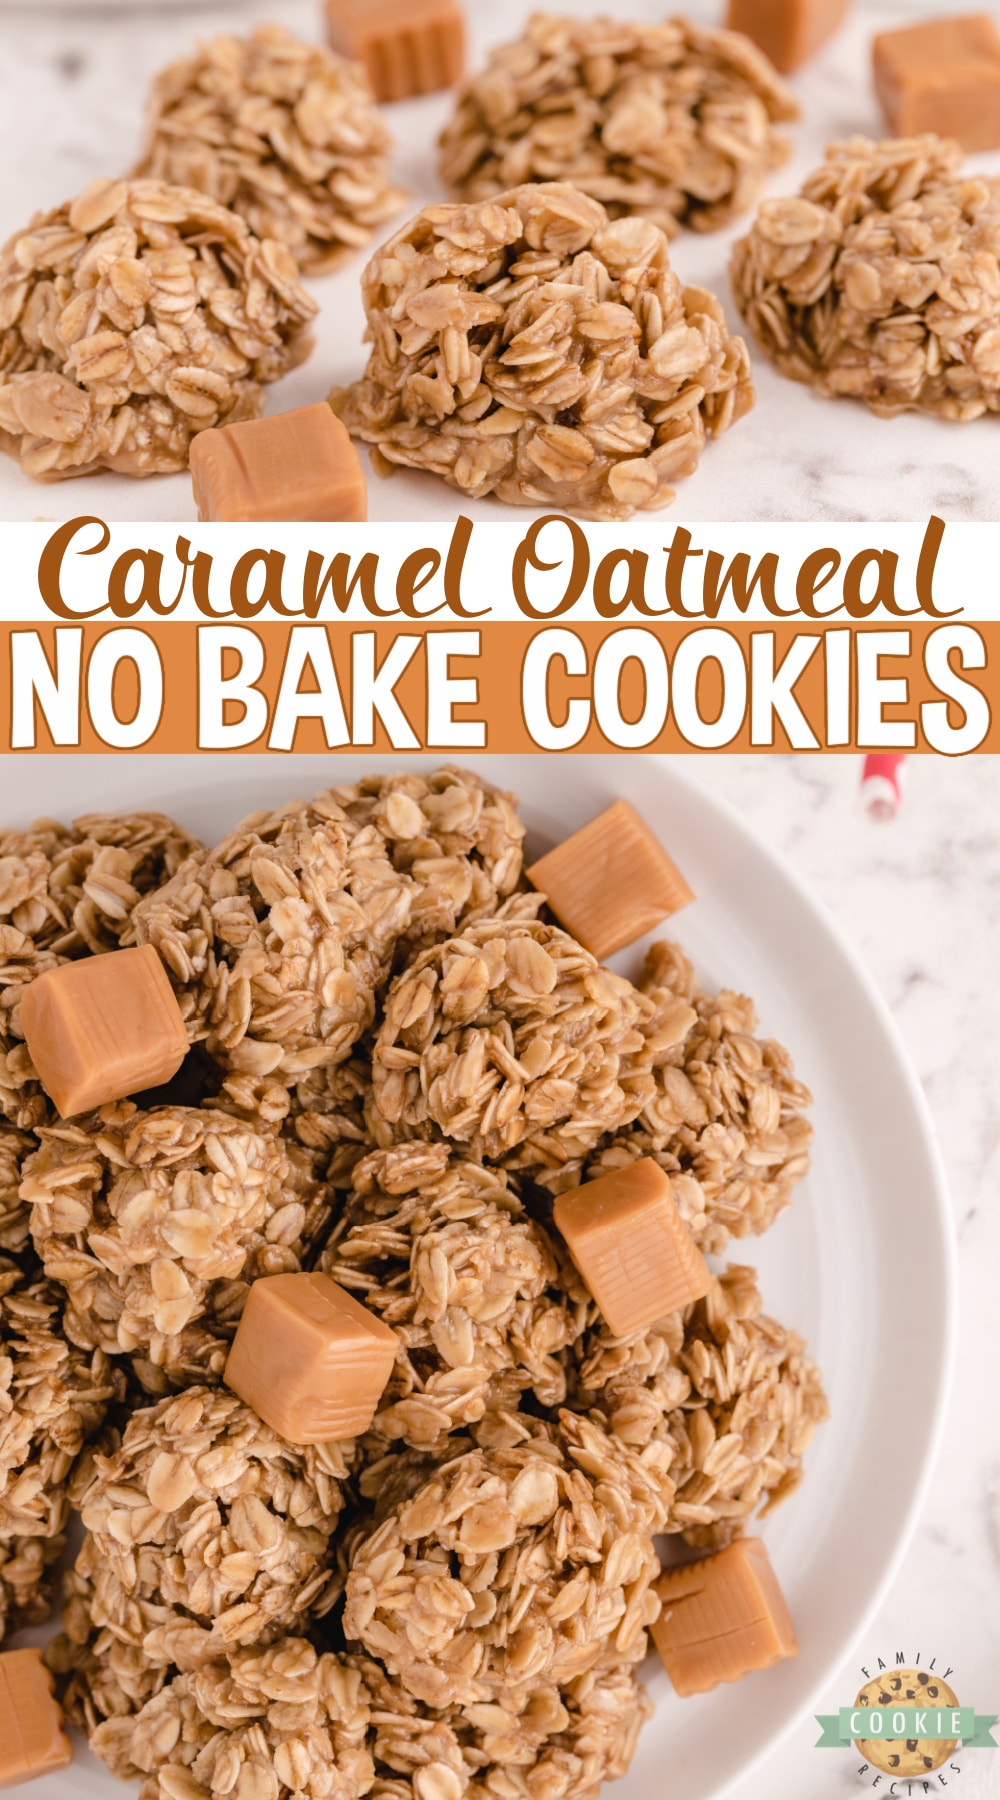 Caramel Oatmeal No Bake Cookies are made with a few simple ingredients and take less than 5 minutes to make! Best no bake cookie recipe made with oats and melted caramel. 